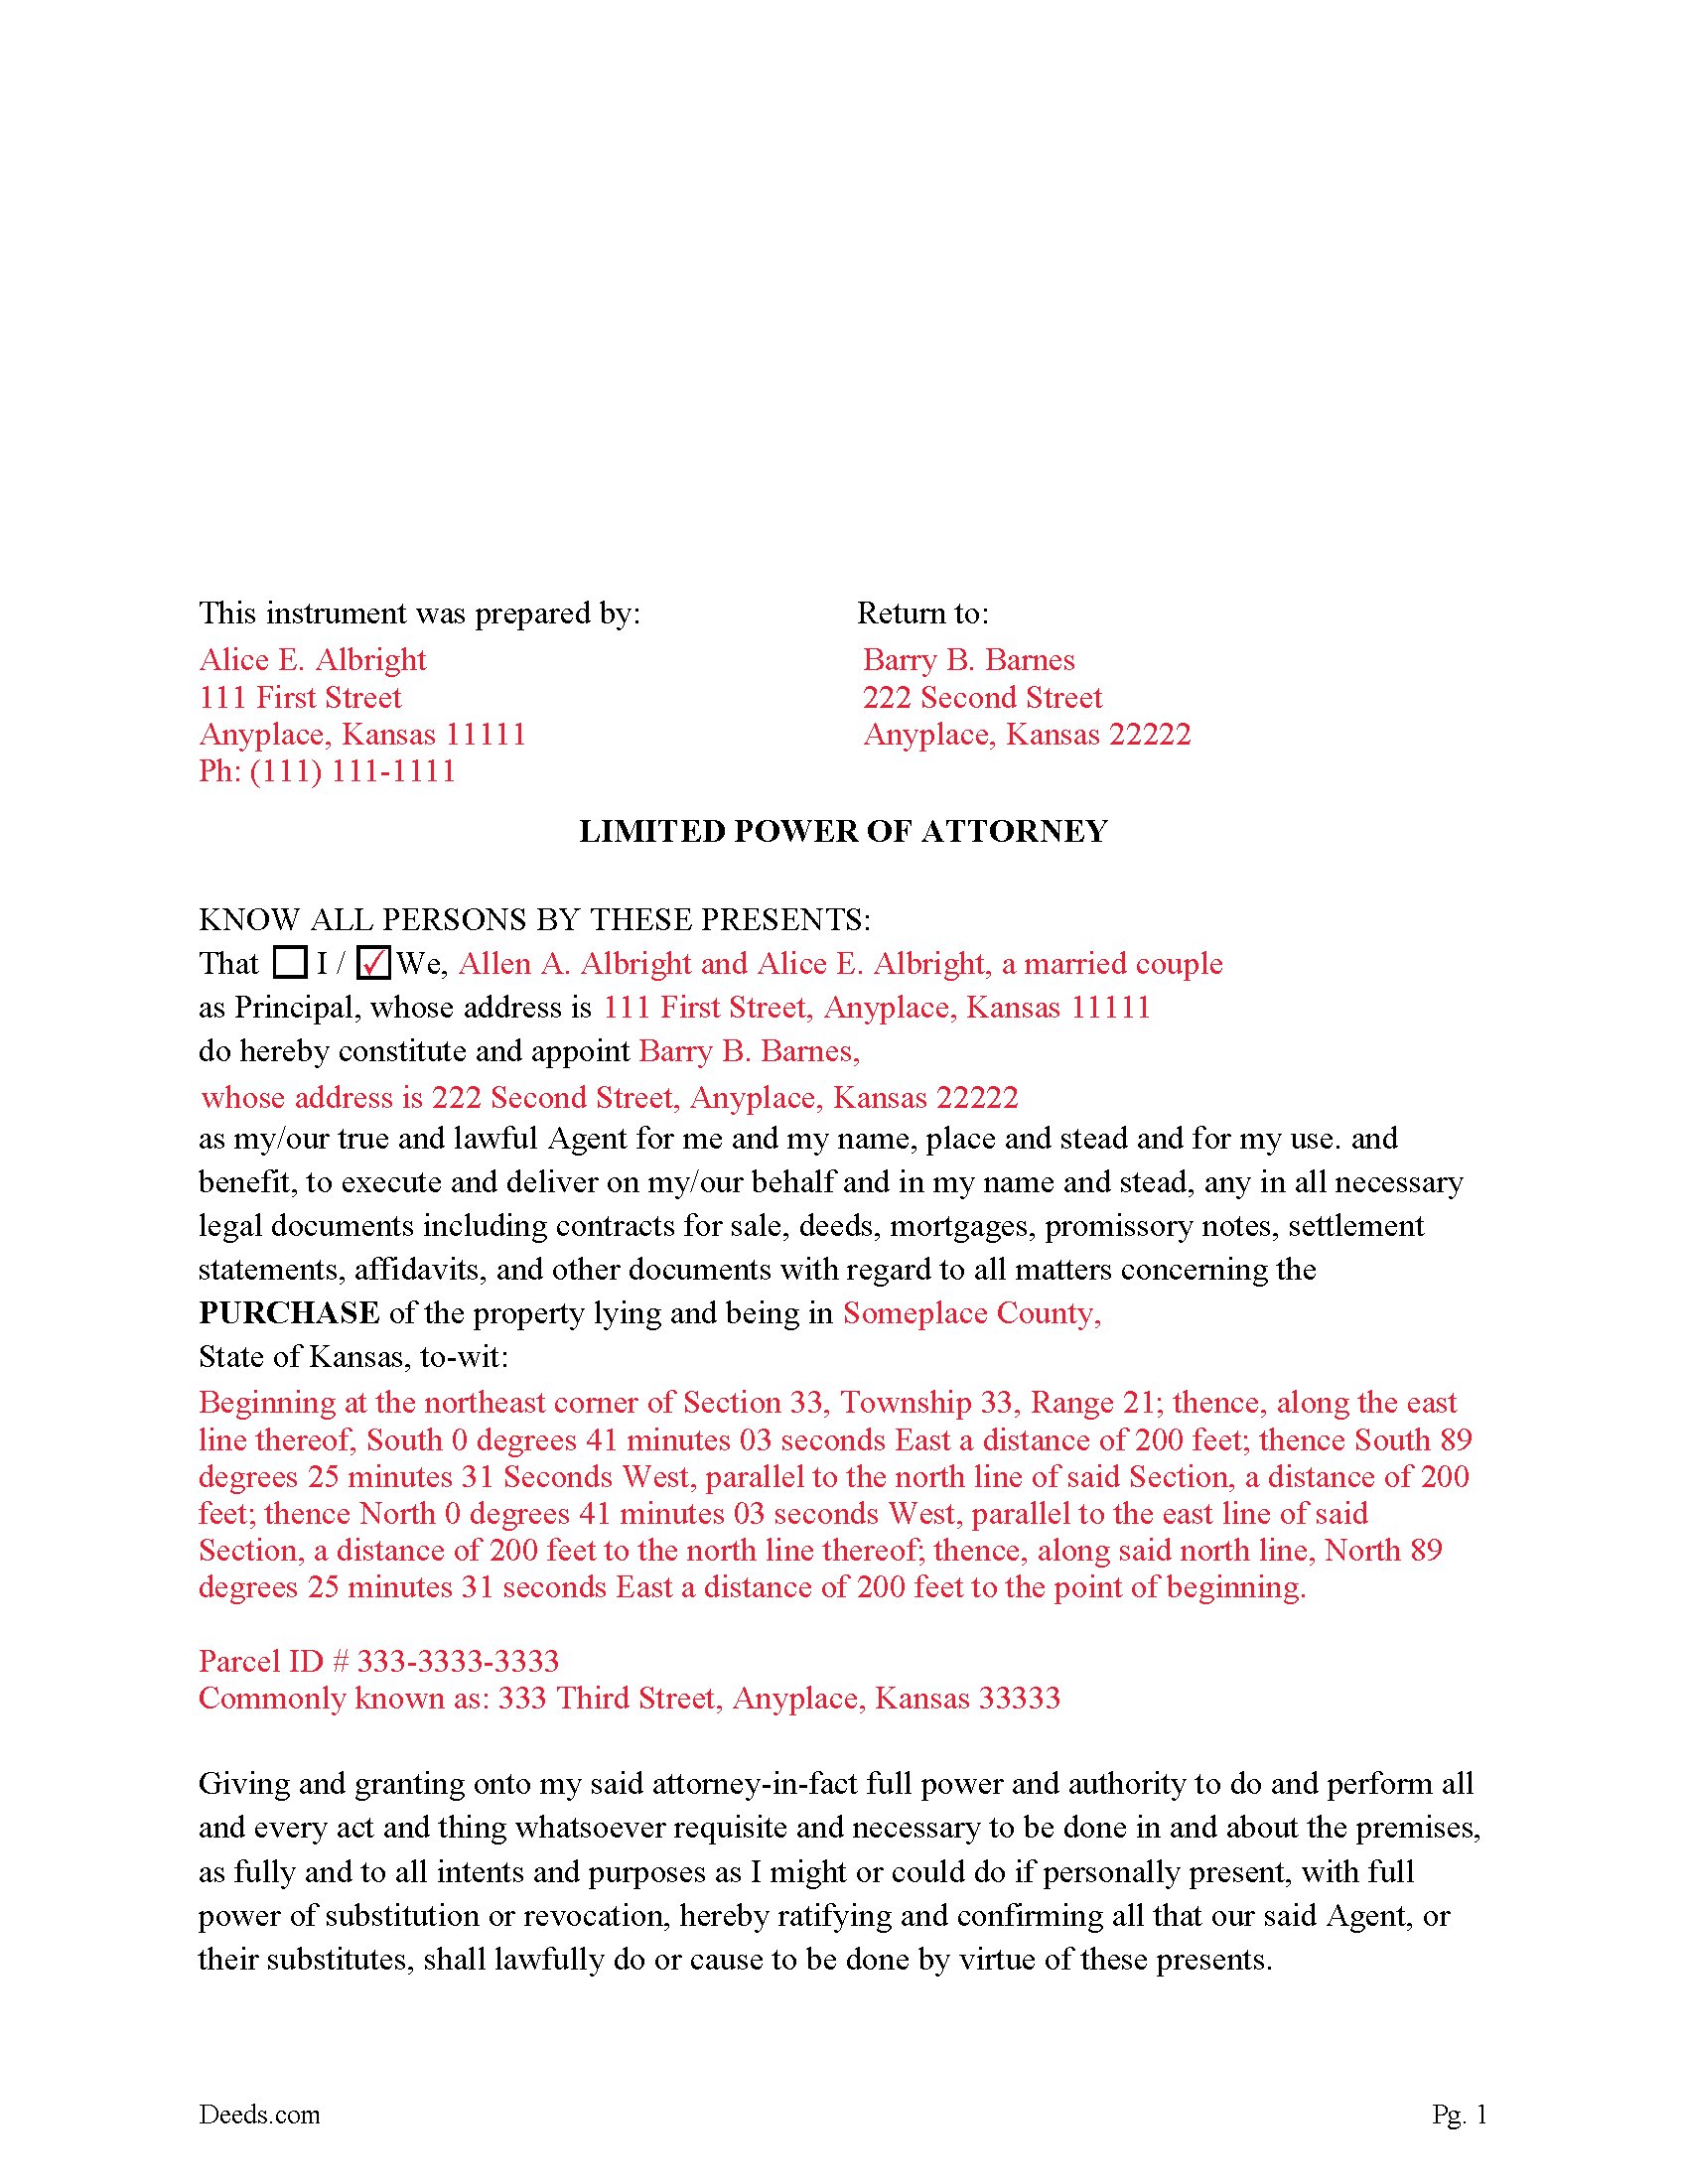 Completed Example of the Limited Power of Attorney for Purchase Document